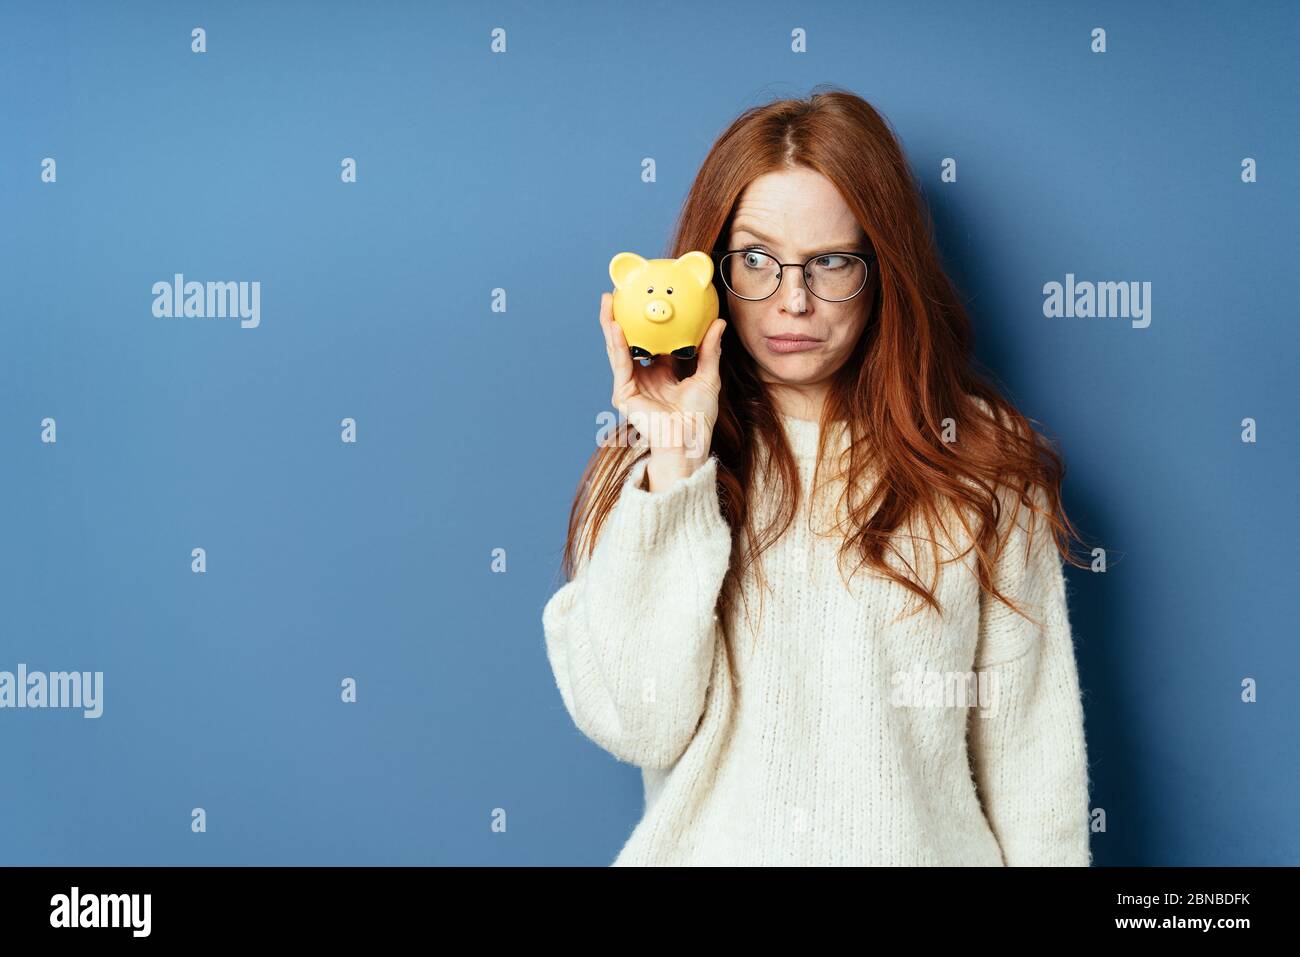 Fun photo of a young woman eyeing her piggy bank with a dismal sideways glance of dismay as she holds it to her cheek on a blue studio background with Stock Photo